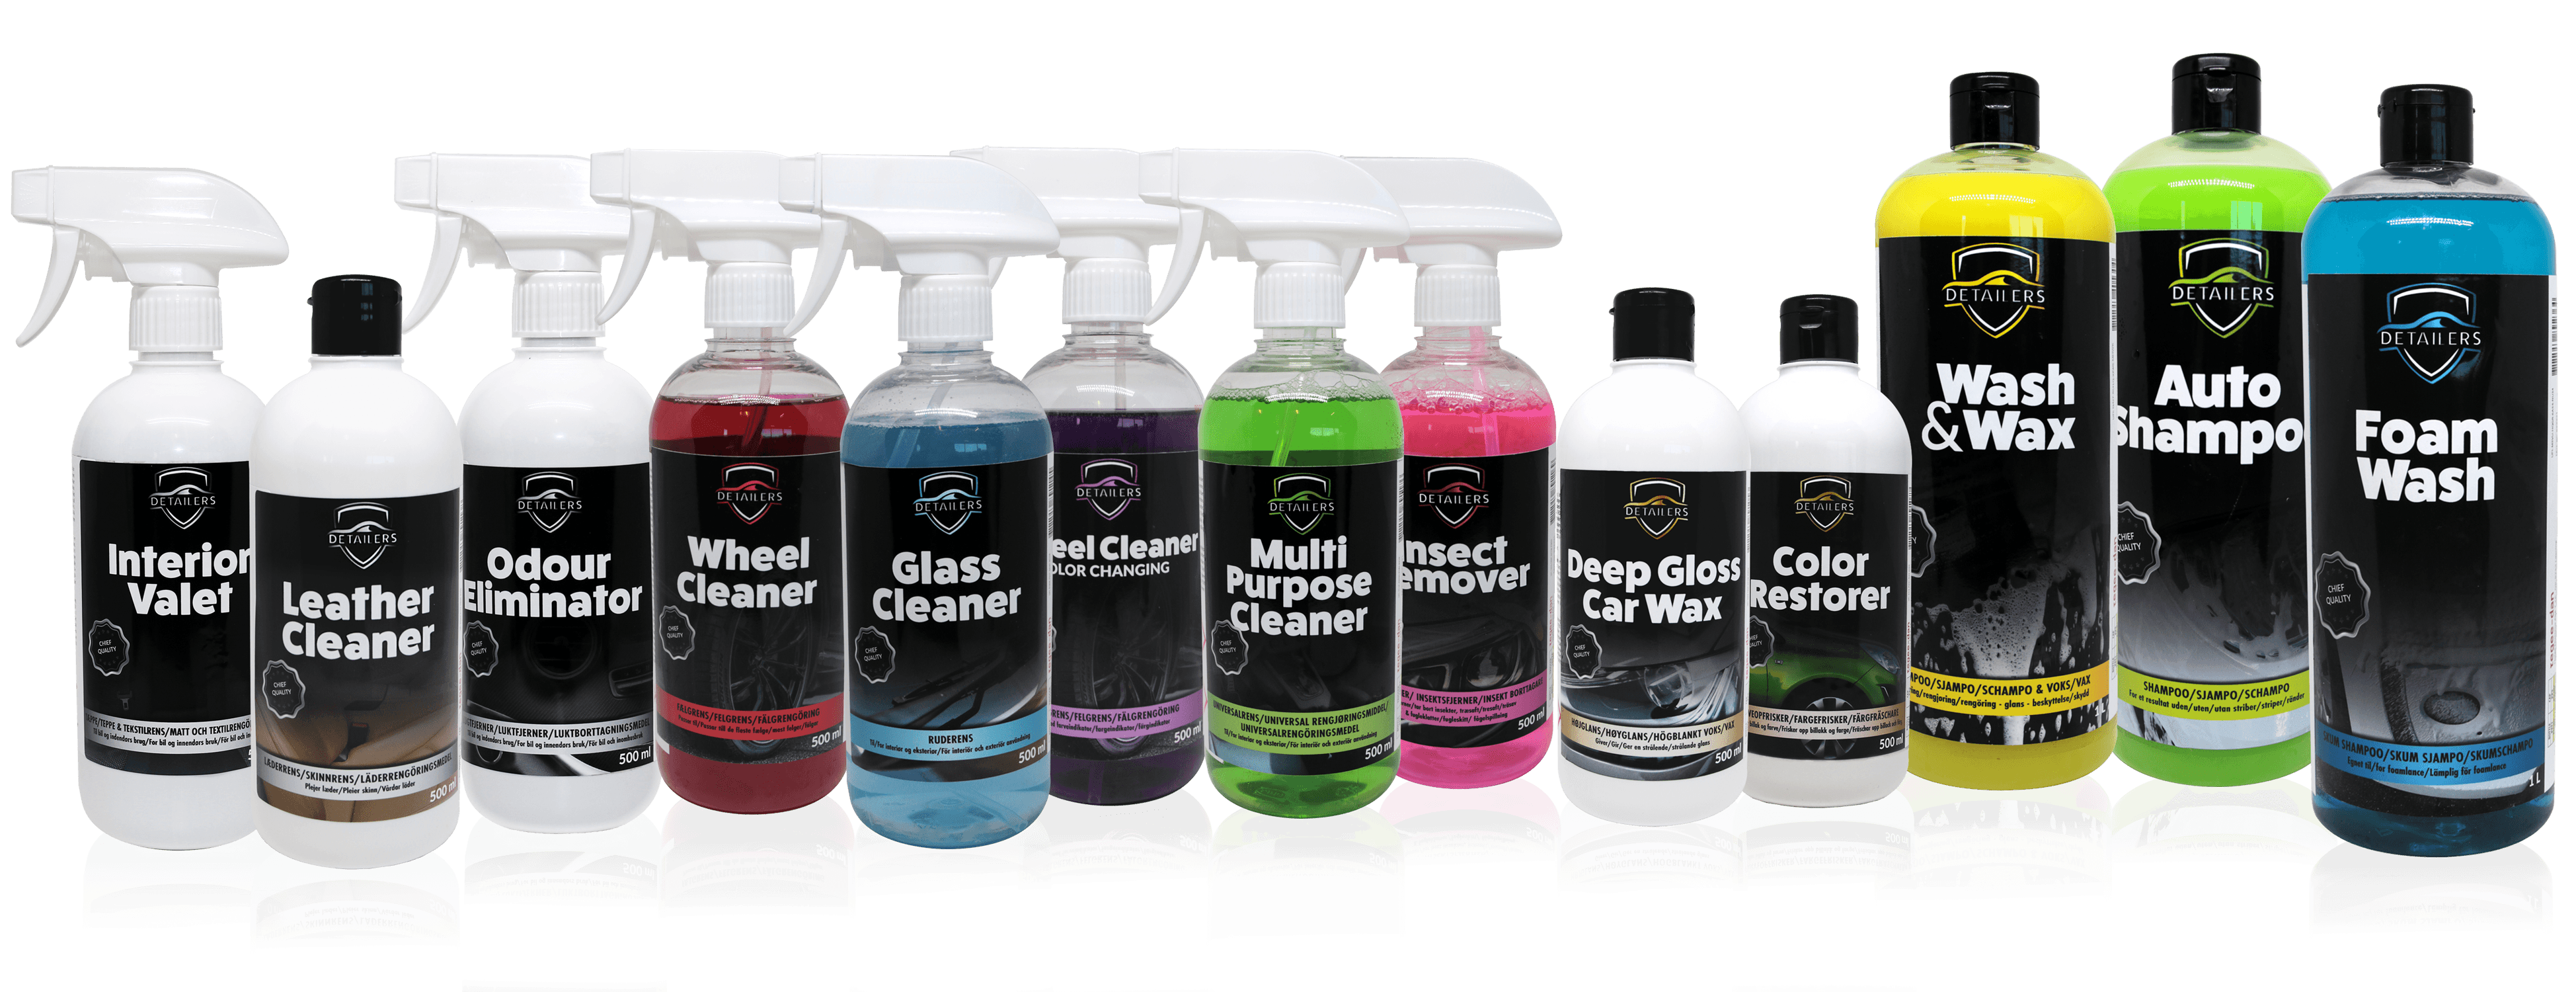 DETAILERS - Xpert Cleaning